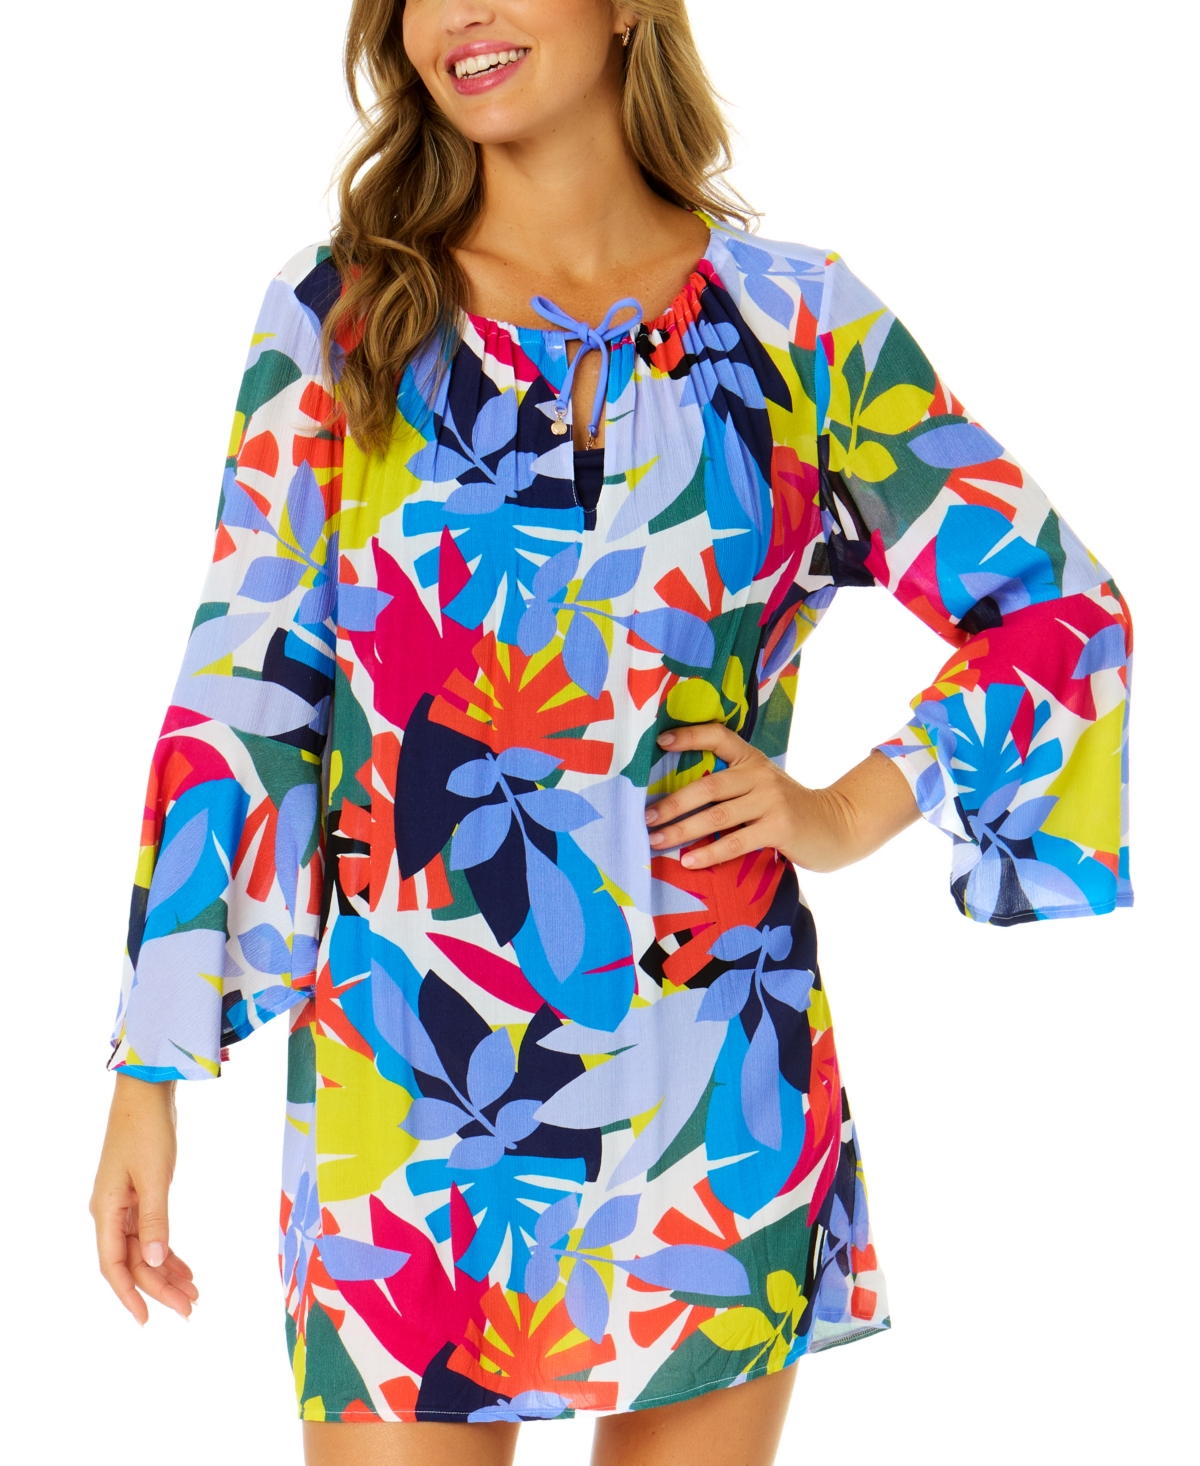 Women's Floral Bell-Sleeve Cover-Up Tunic - Tropical Foral